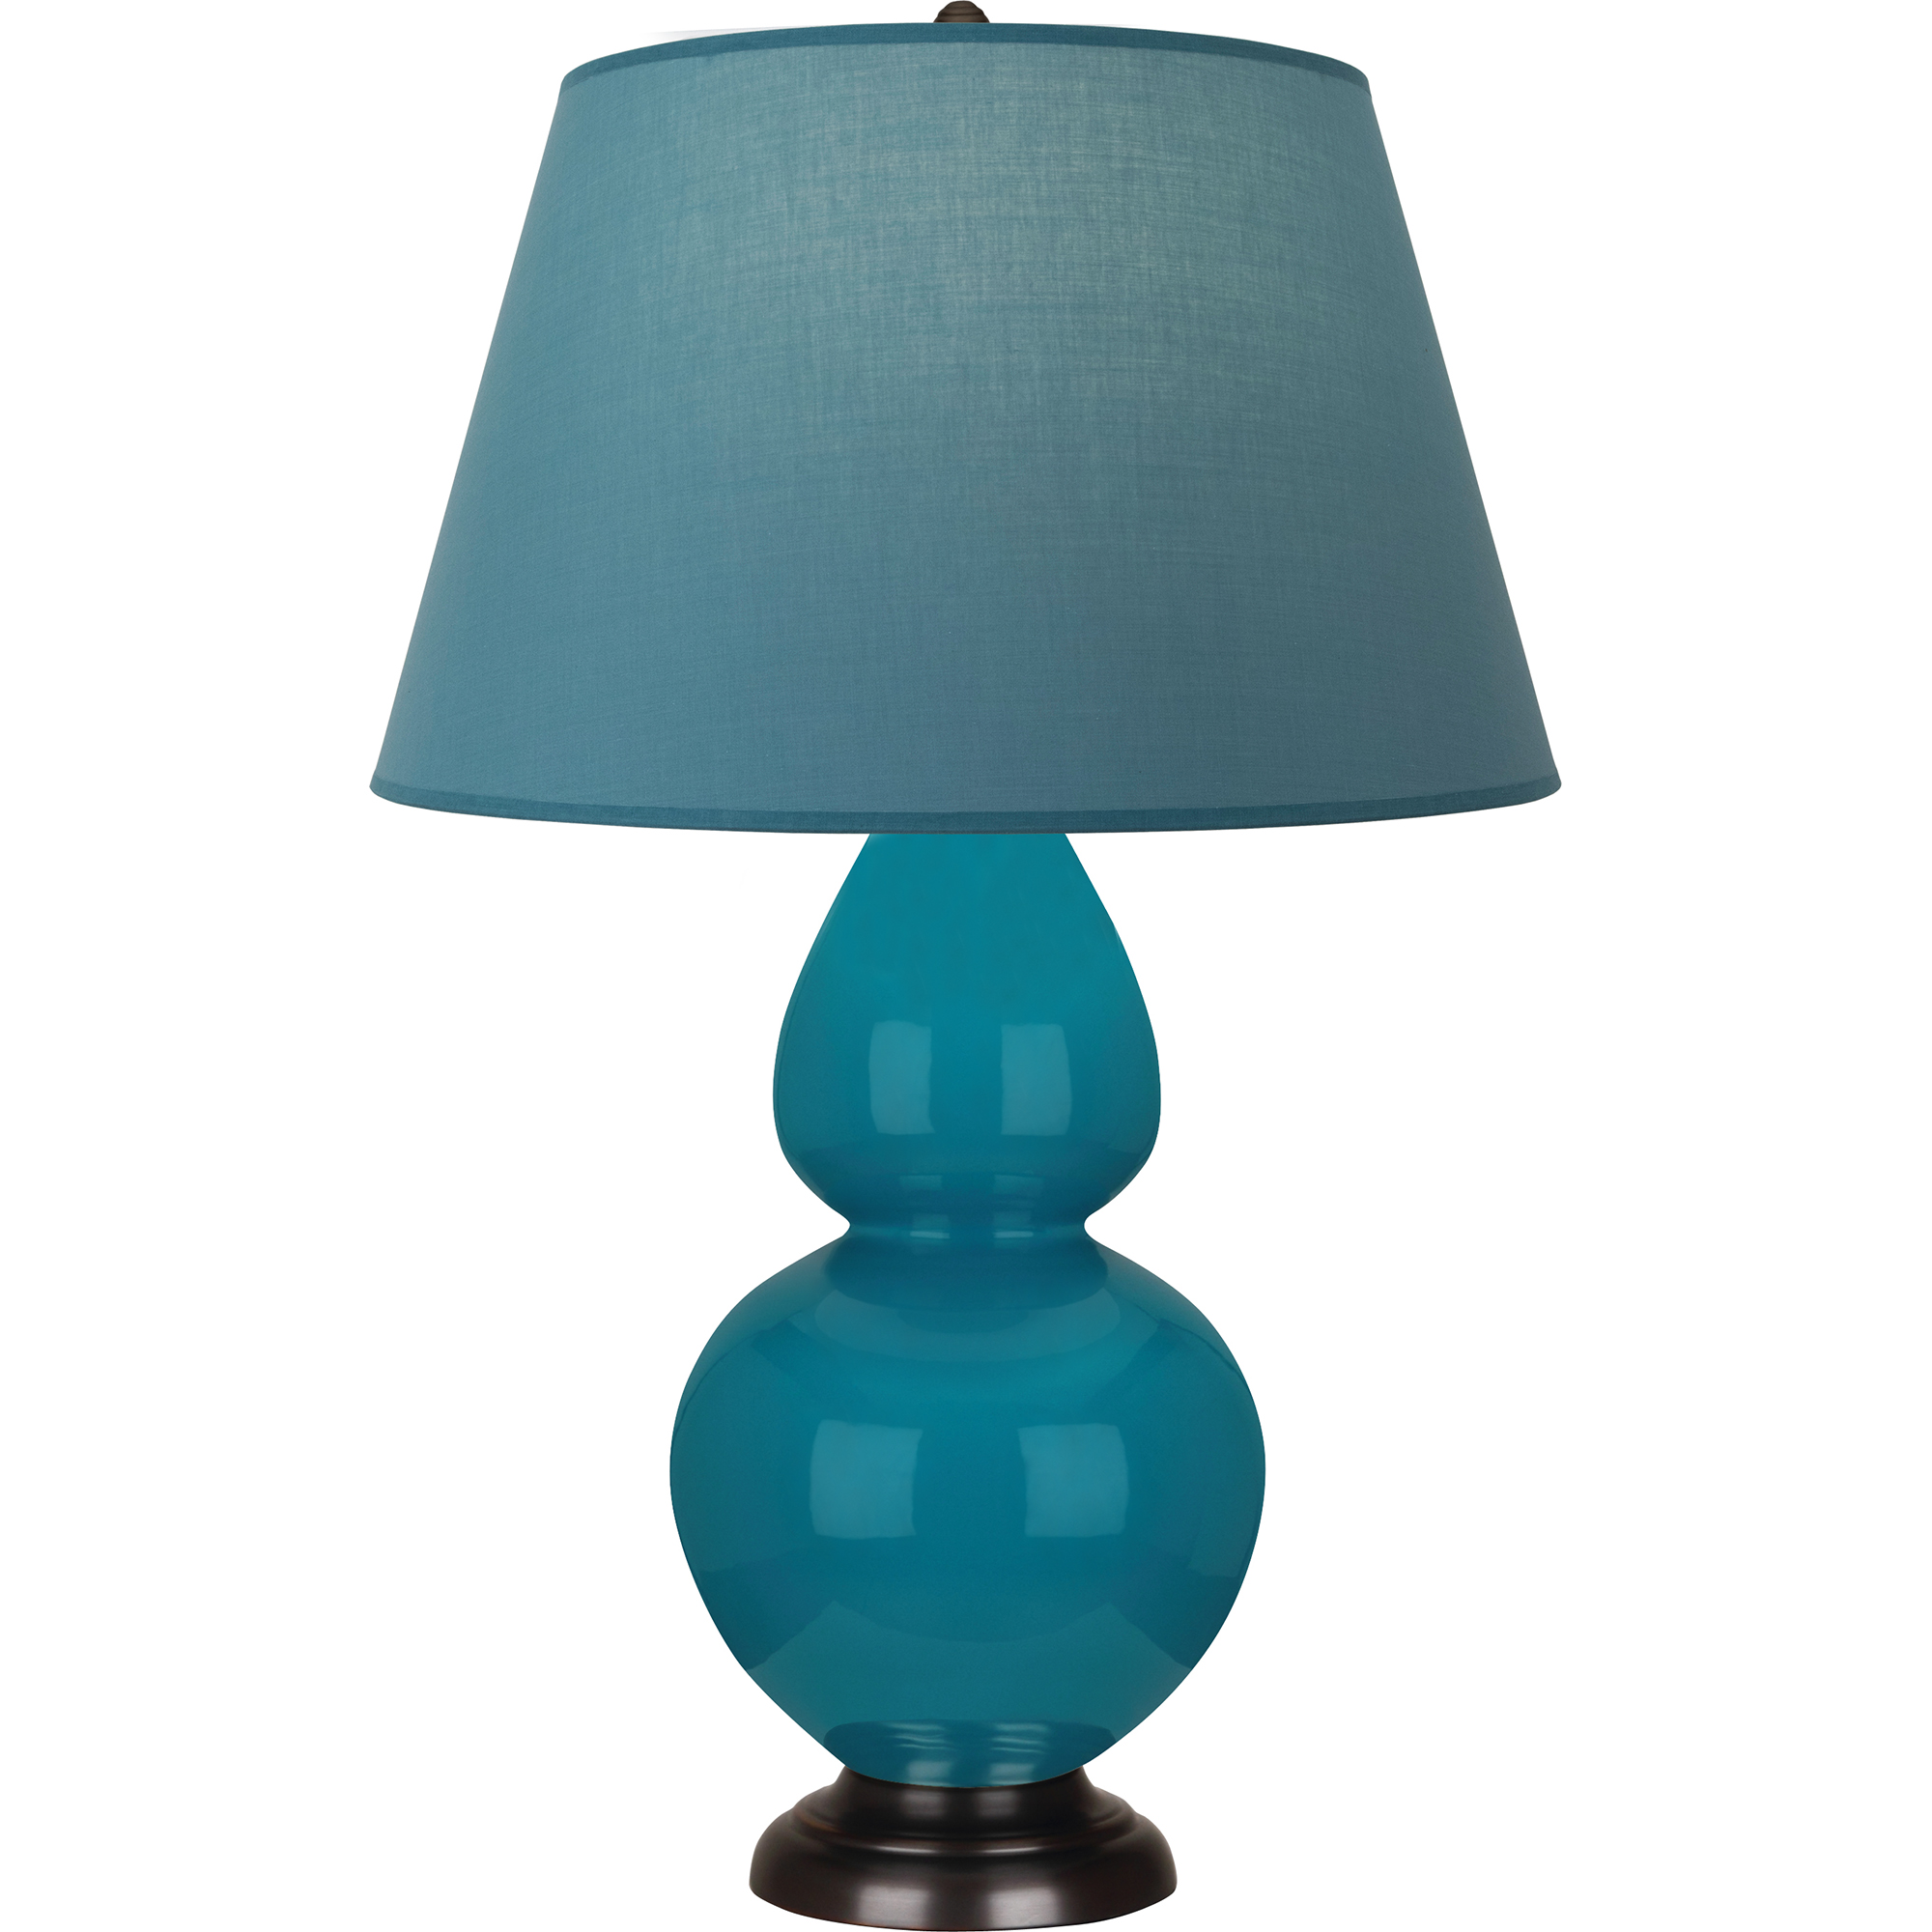 Double Gourd Table Lamp Style #1752B